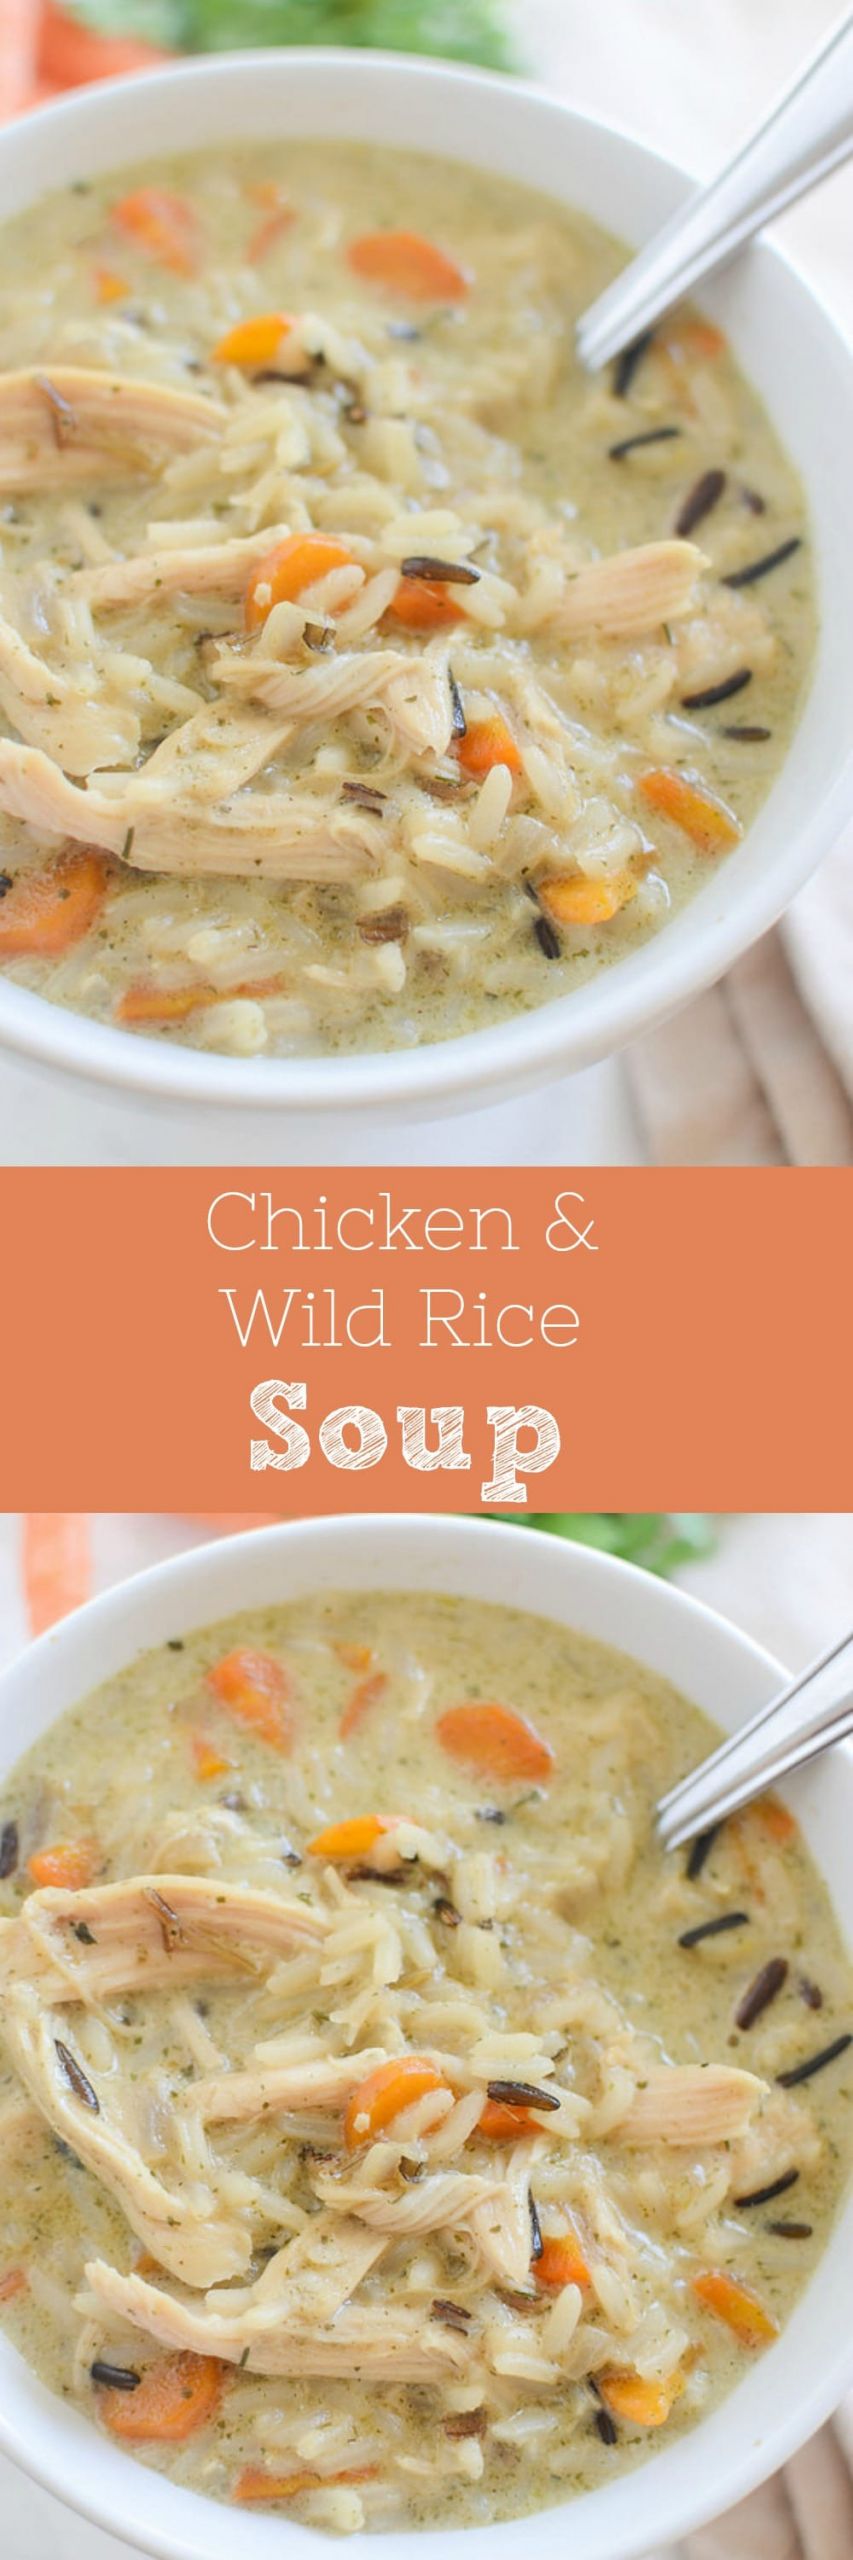 Panera Chicken And Wild Rice Soup Slow Cooker
 Chicken and Wild Rice Soup Panera Copycat Fake Ginger